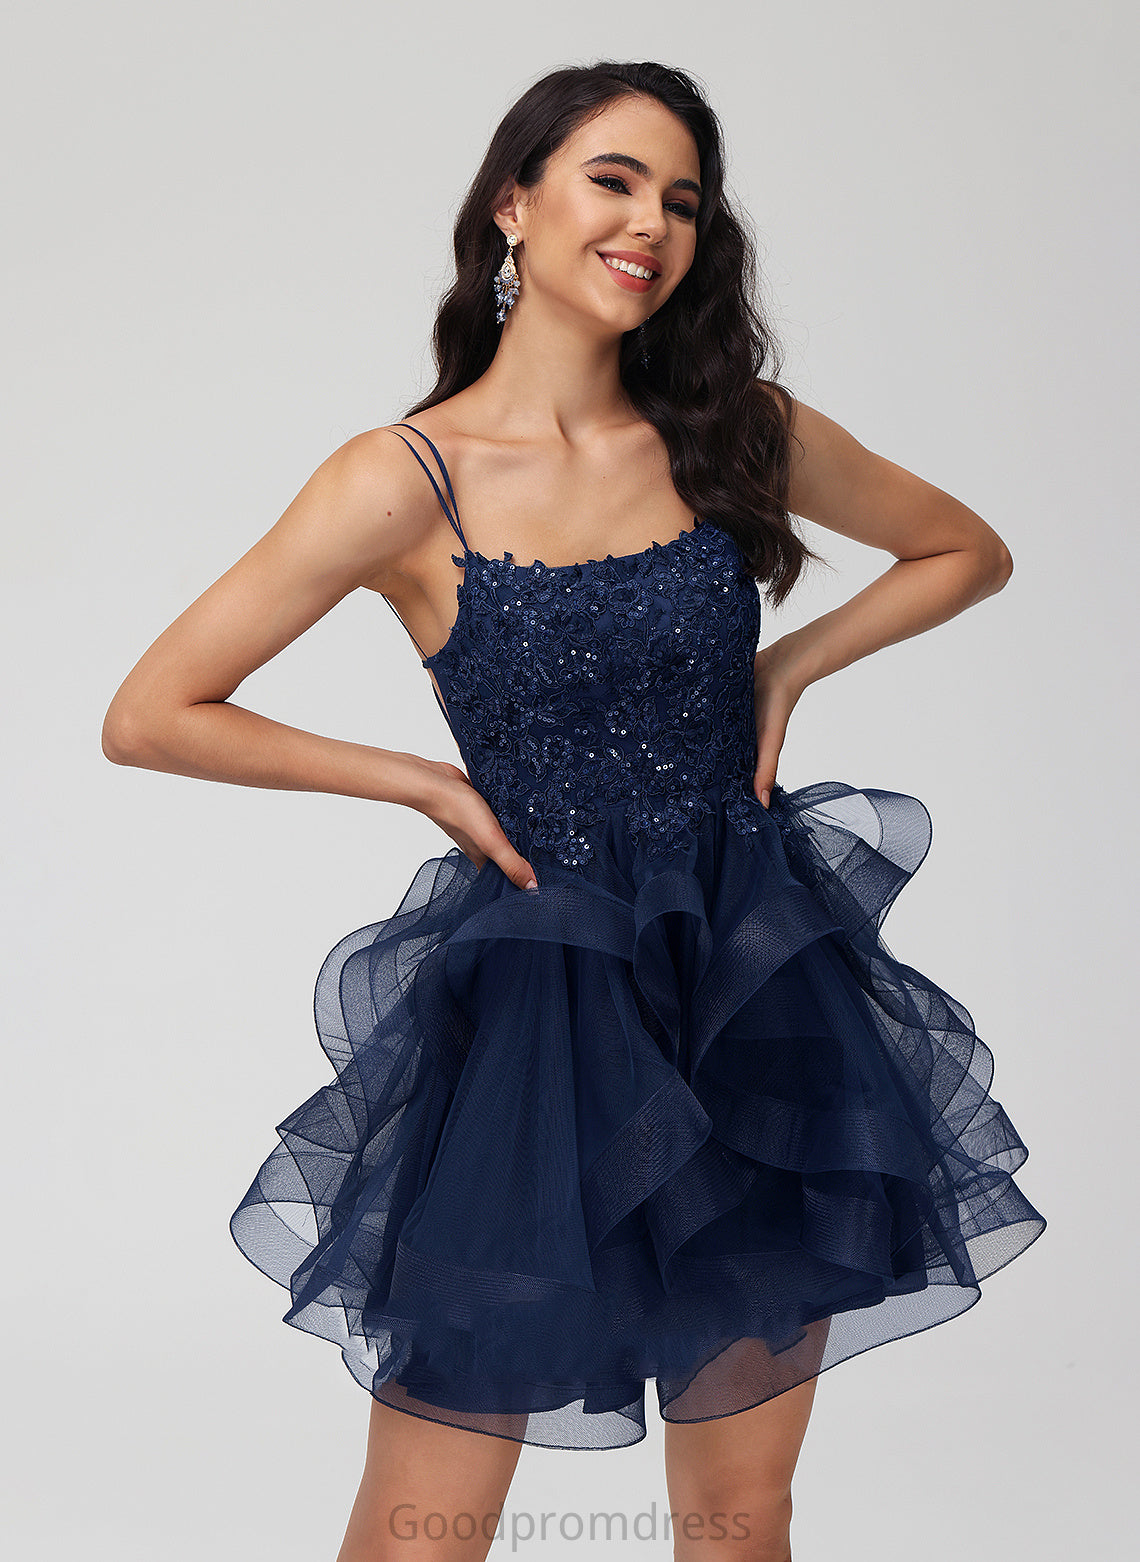 Scoop Dress Homecoming Dresses Short/Mini Tulle Ball-Gown/Princess With Lace Homecoming Neck Cherish Sequins